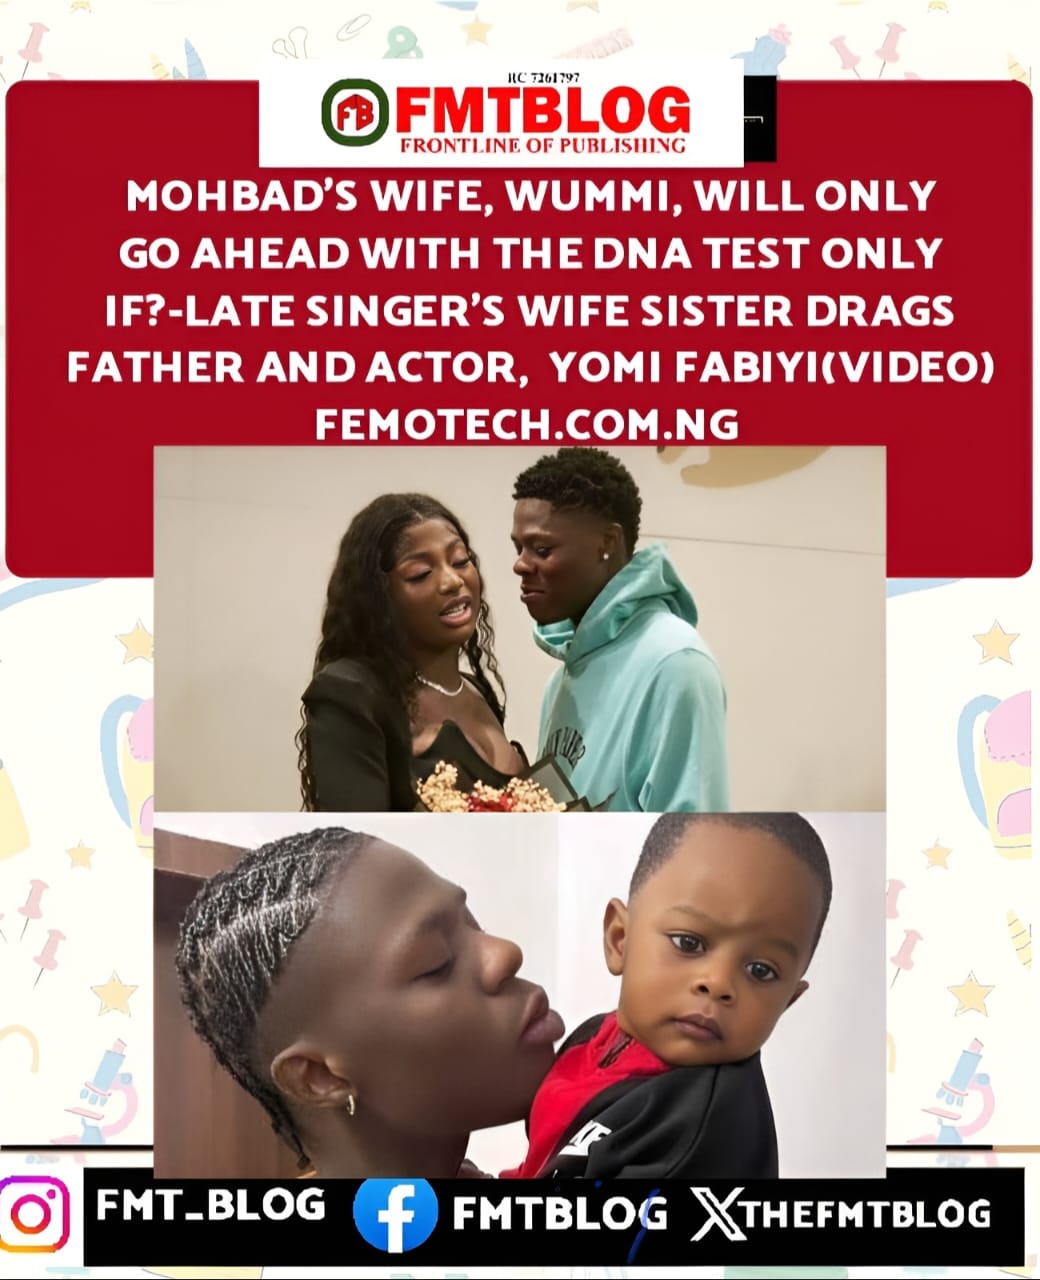 Mohbad’s Wife, Wunmi, Will Only Go Ahead With The DNA Test, Only IF ?- Late Singer’s Wife Sister Drags Father And Actor Yomi Fabiyi (VIDEO)